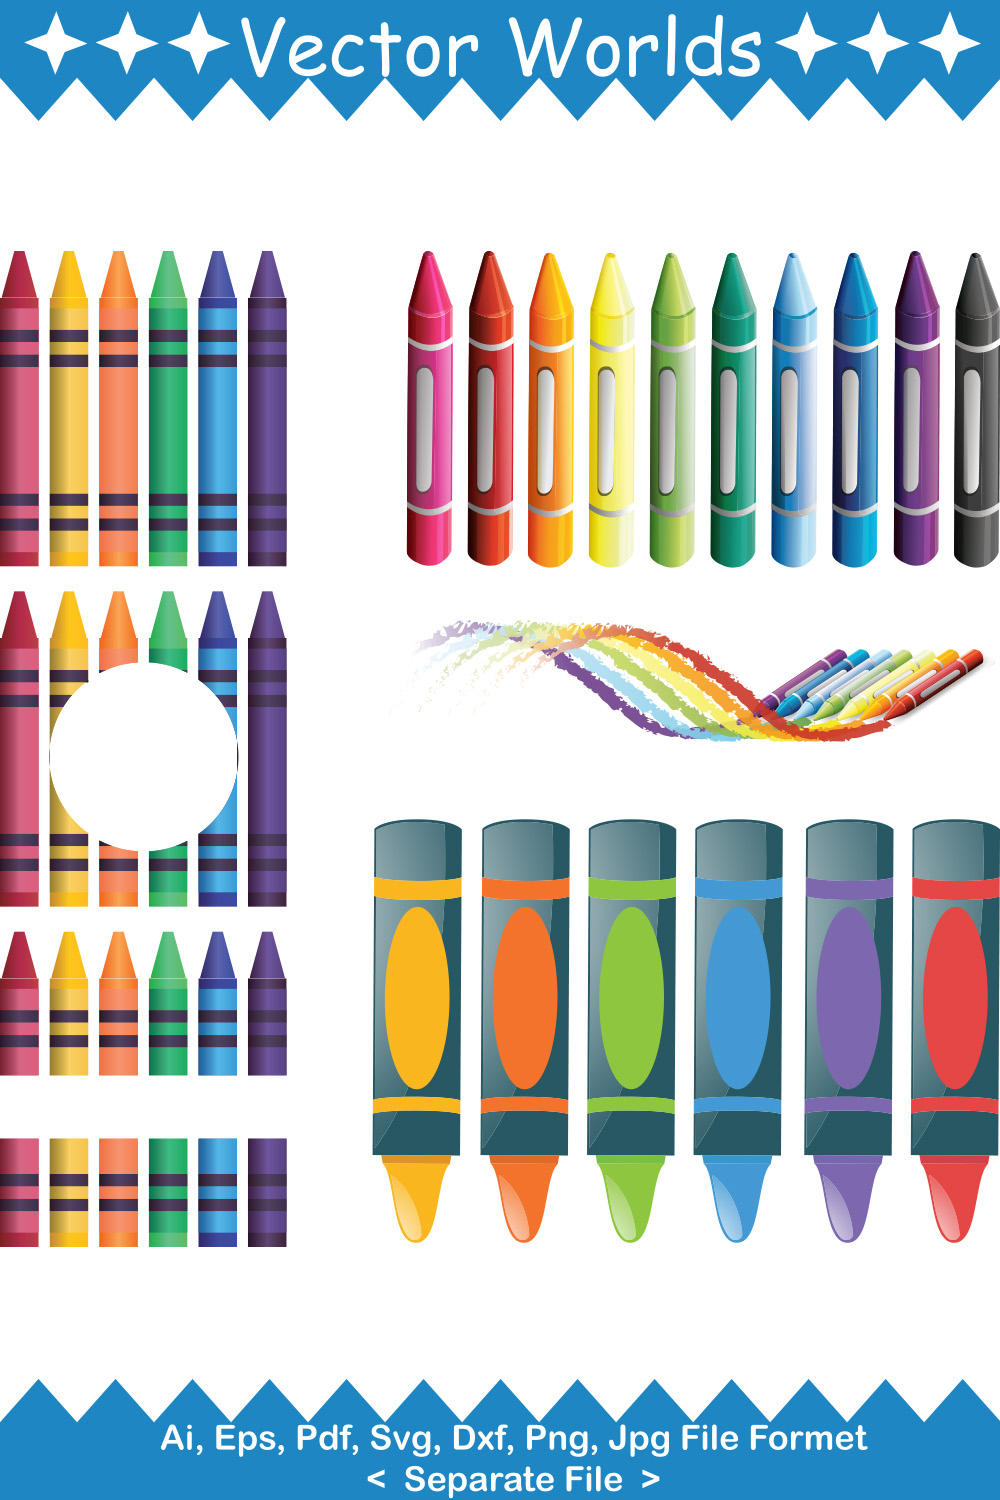 Collection of enchanting vector image of crayons